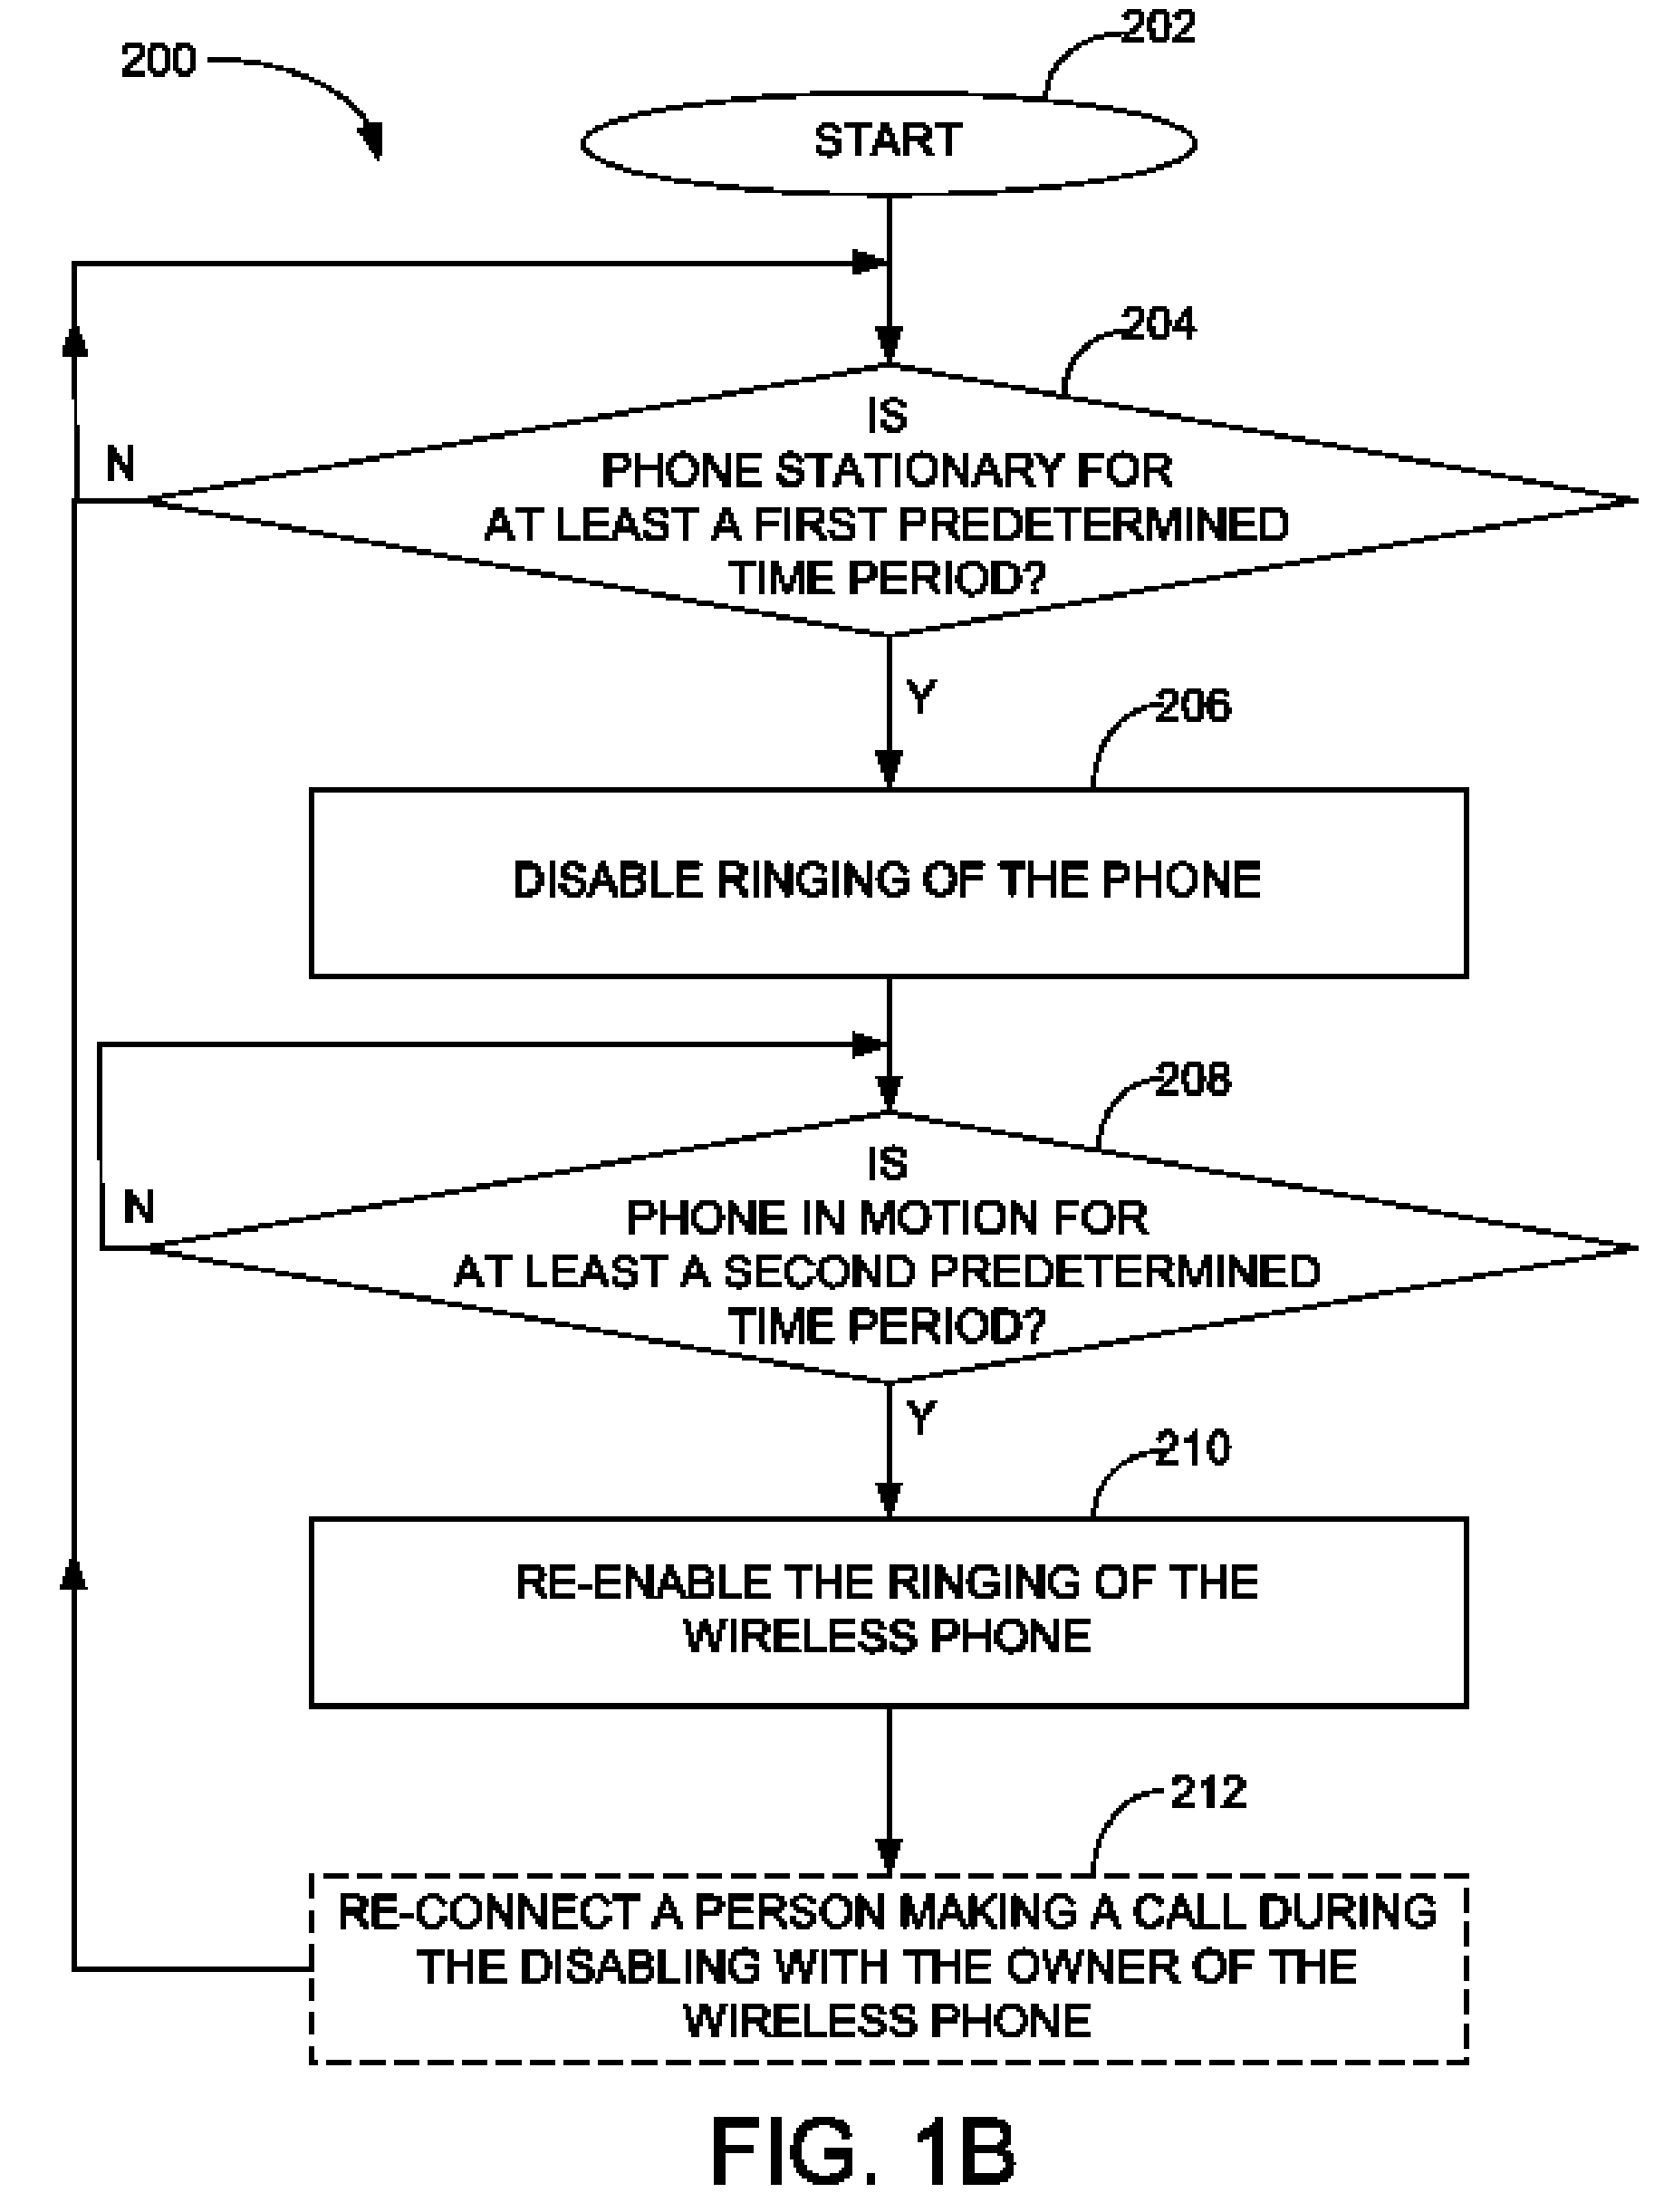 Method and apparatus for dynamically altering the operational characteristics of a wireless phone by monitoring the phone's movement and/or location